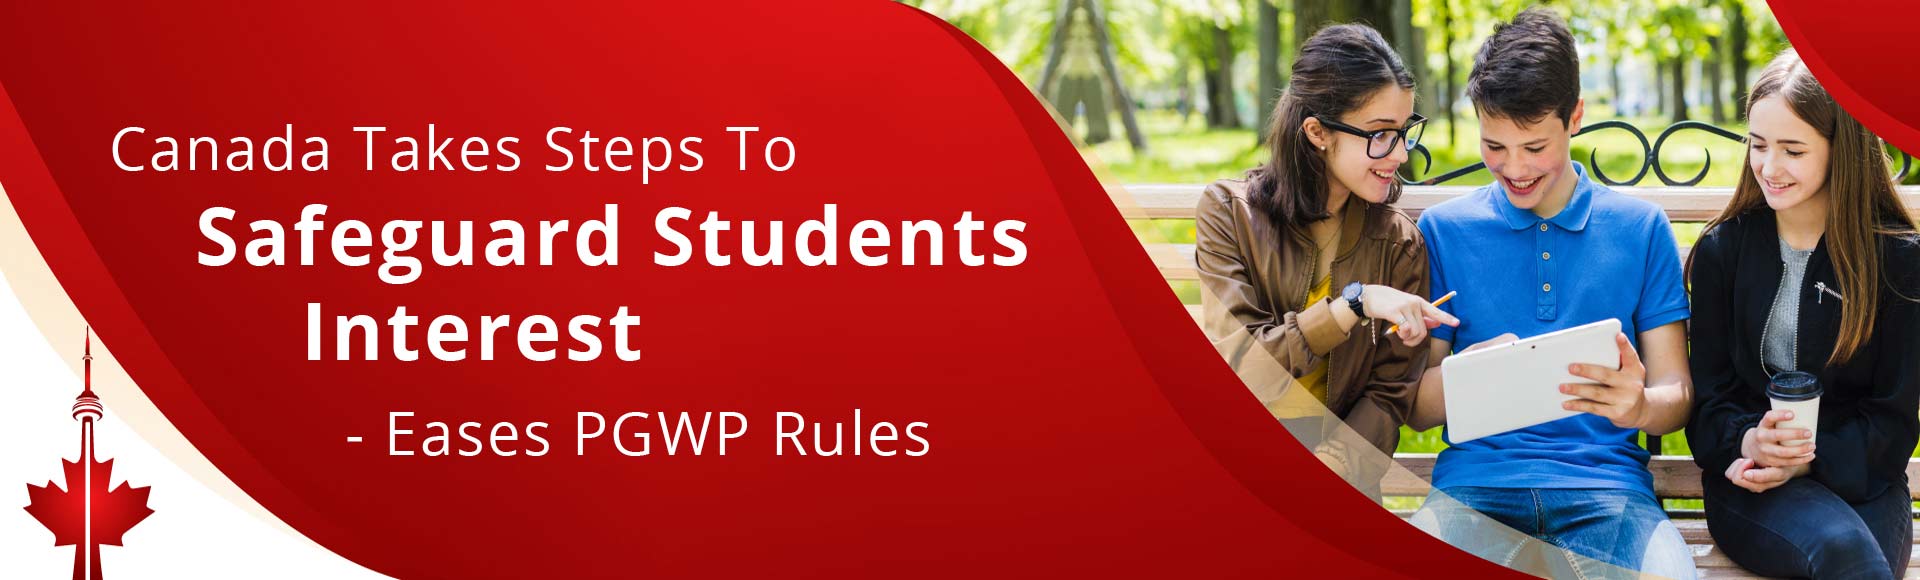 Canada takes steps to safeguard students’ interest - eases PGWP rules